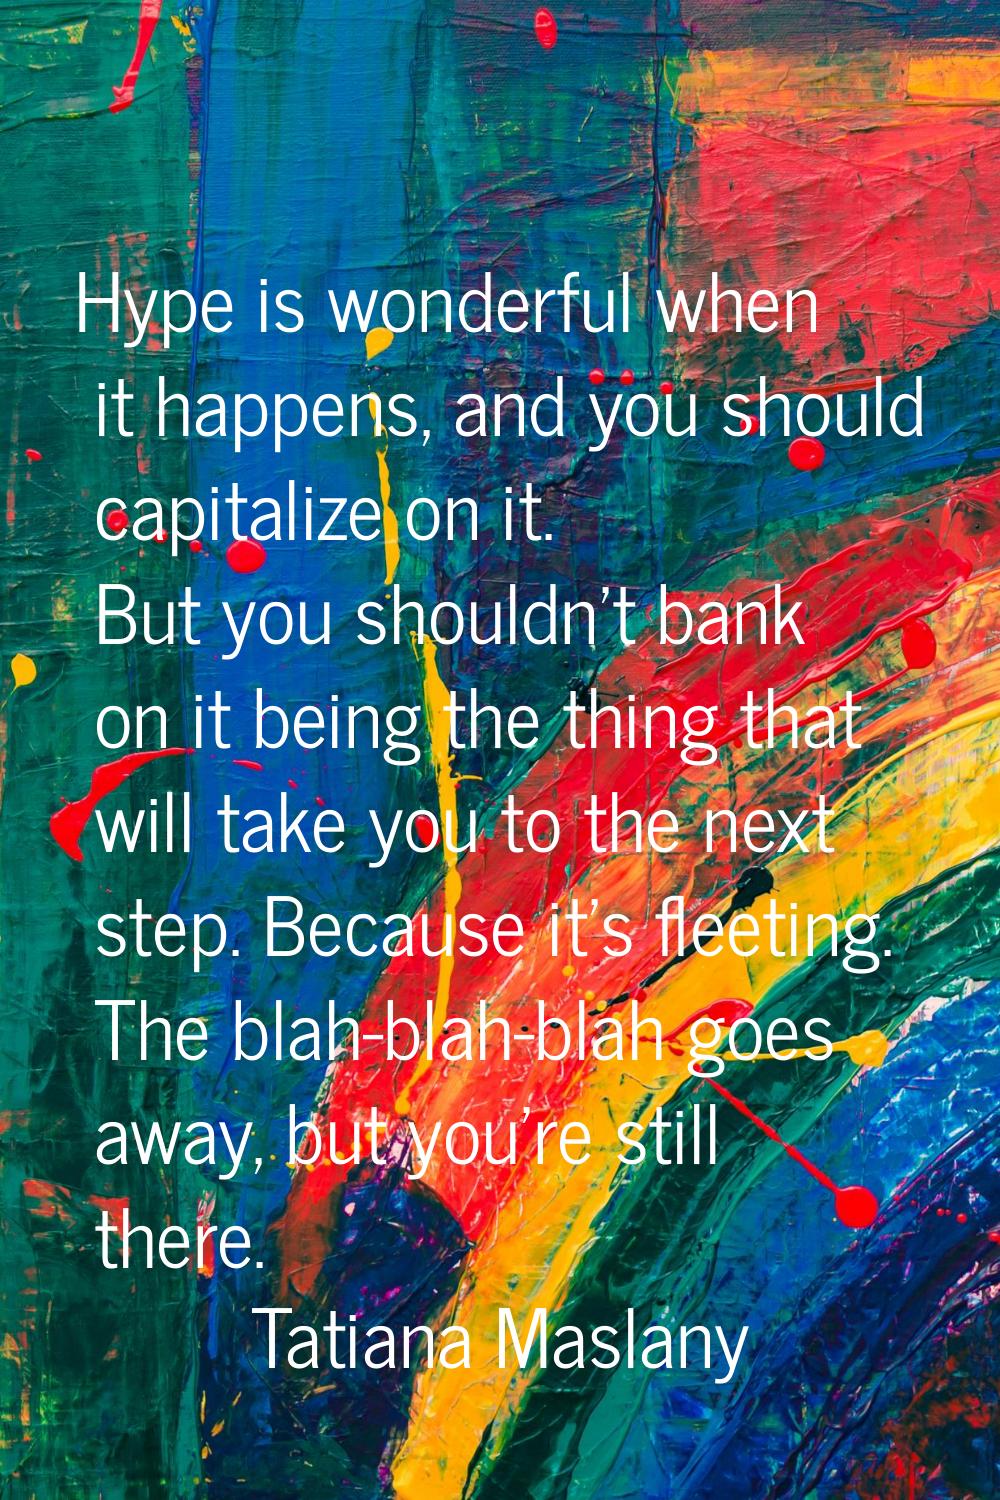 Hype is wonderful when it happens, and you should capitalize on it. But you shouldn't bank on it be